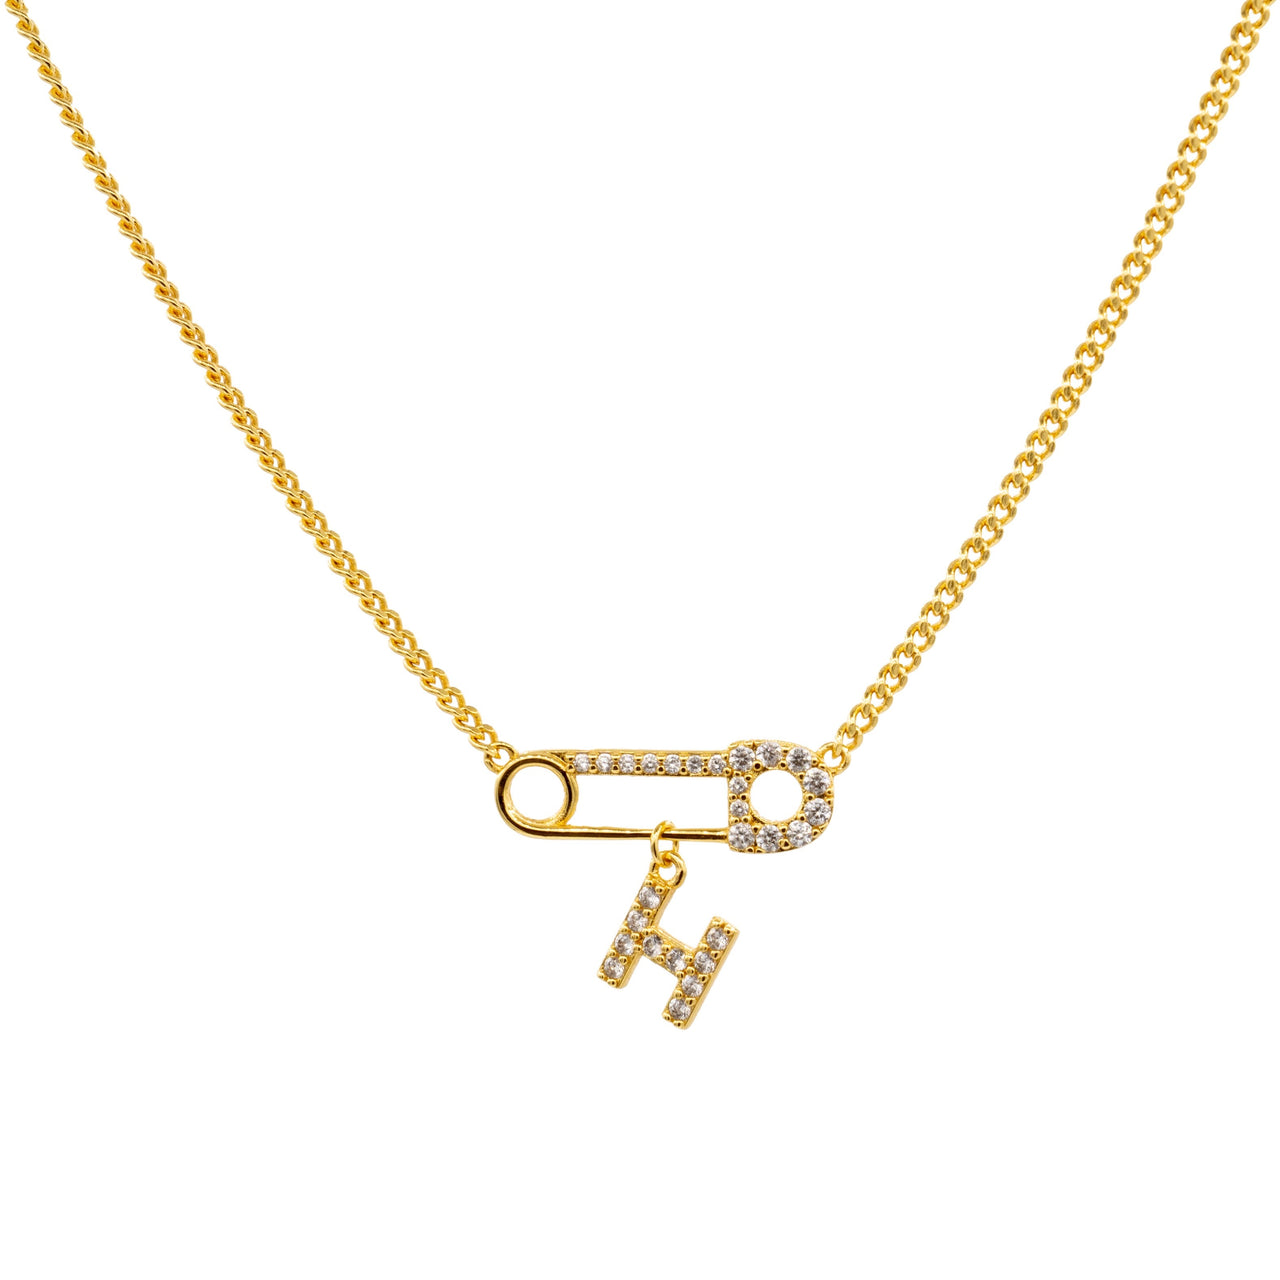 The Gold Filled Personalized Pin Necklace